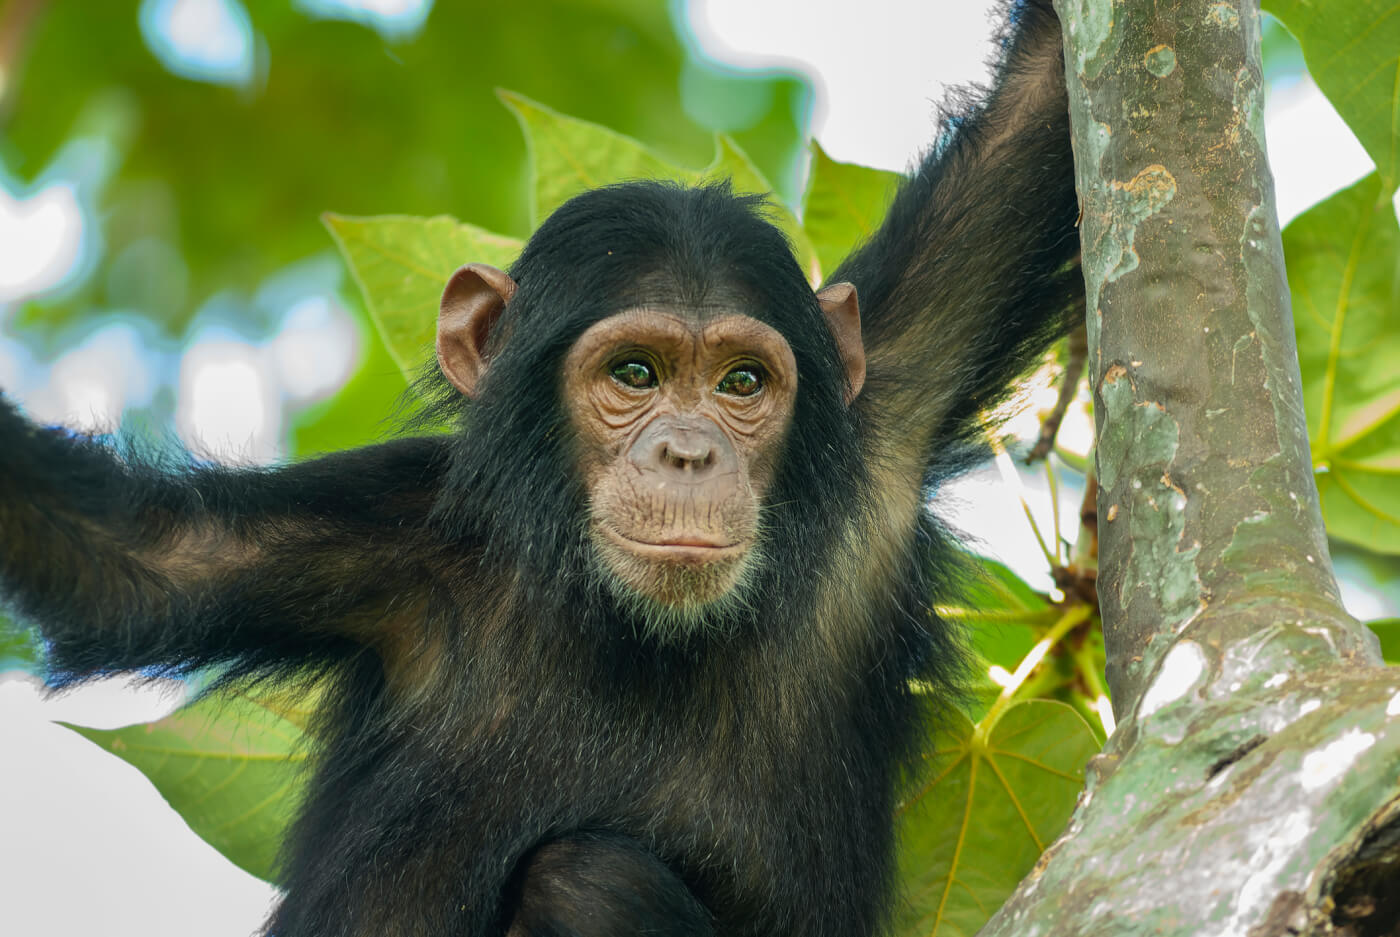 American Greetings Ends Sales of Demeaning Chimpanzee Cards After PETA Campaign